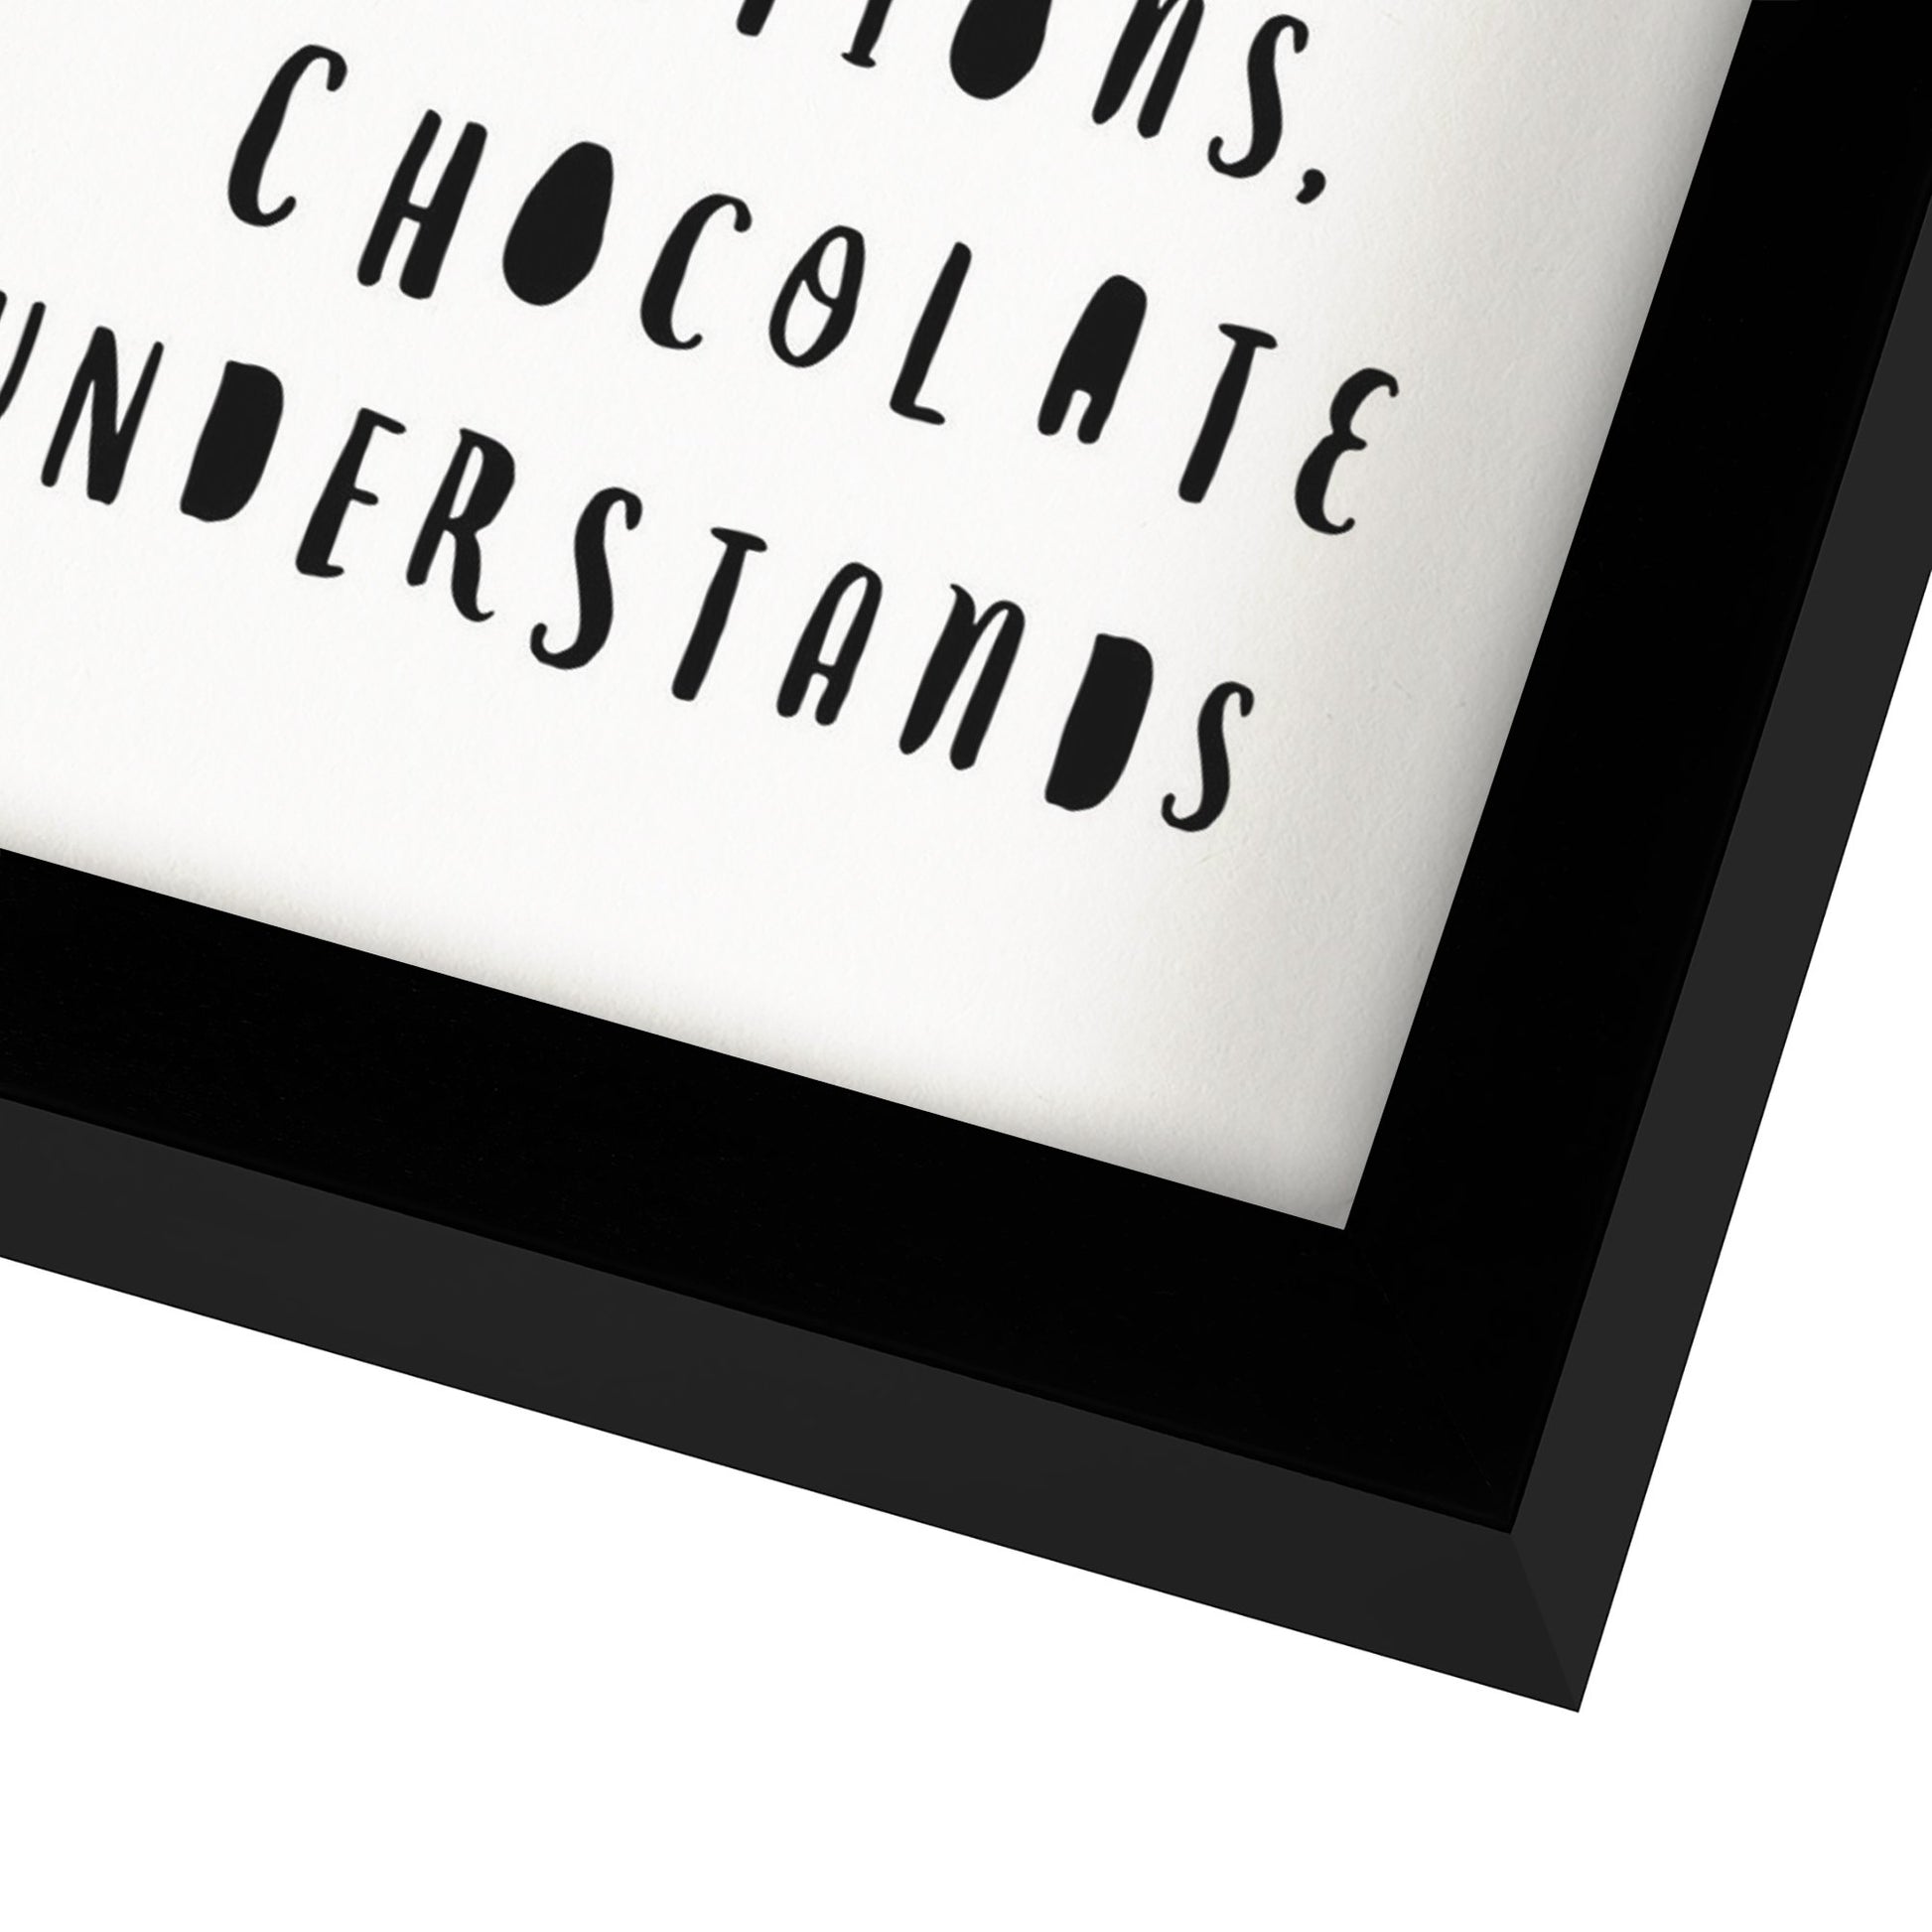 Chocolate Doesnt Ask Silly Questions Chocolate Understands By Motivated Type - Shadow Box Framed Art - Americanflat